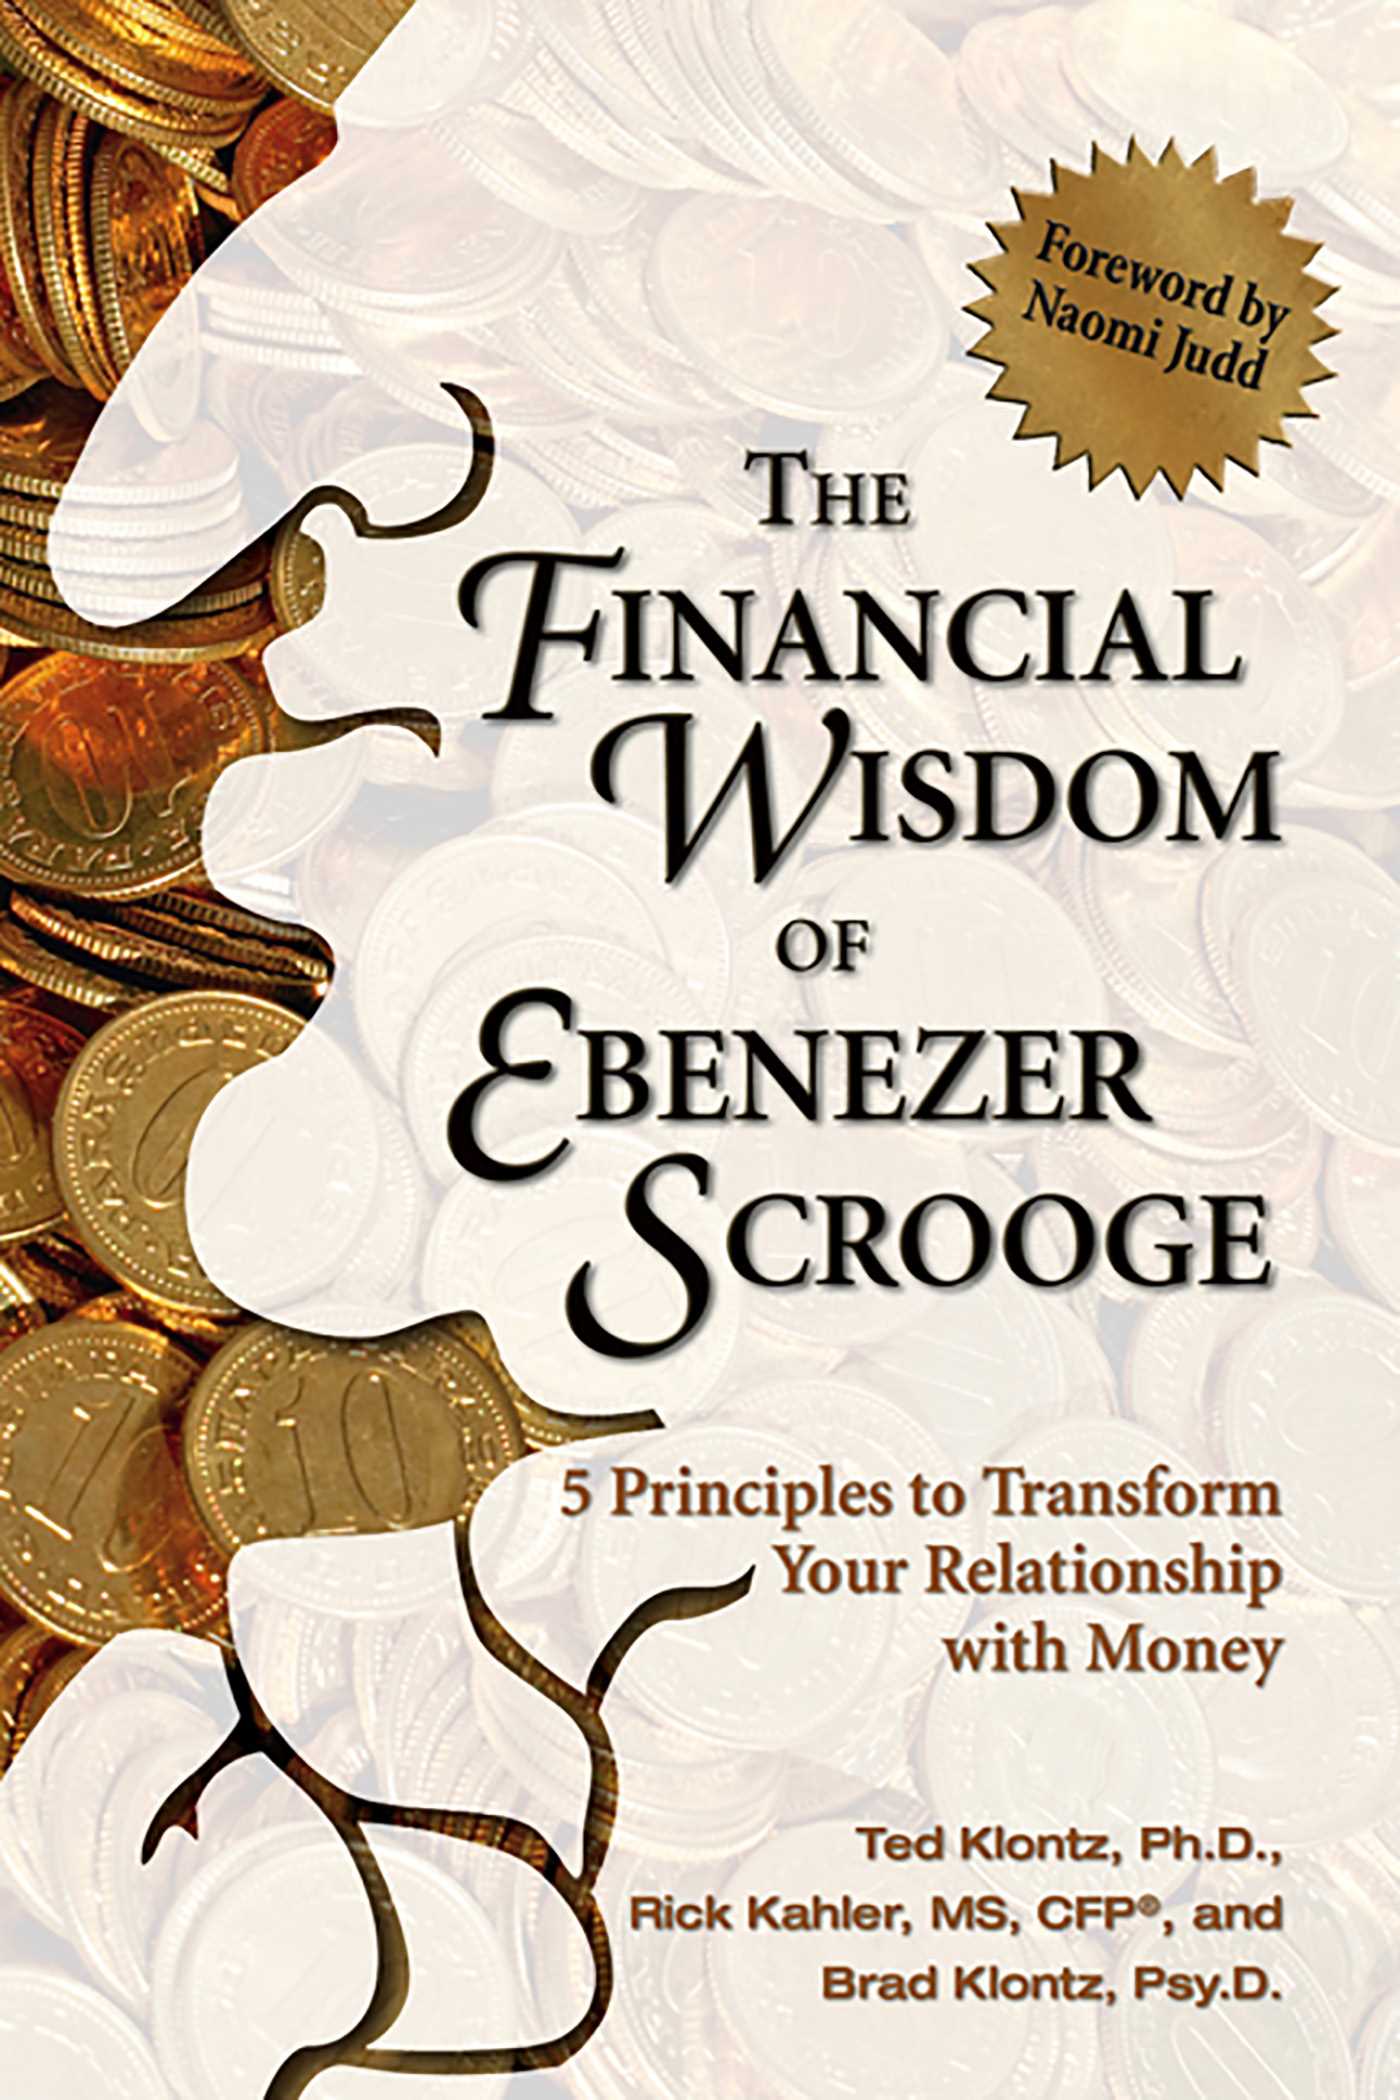 The Financial Wisdom of Ebenezer Scrooge : 5 Principles to Transform Your Relationship with Money | Business & Management